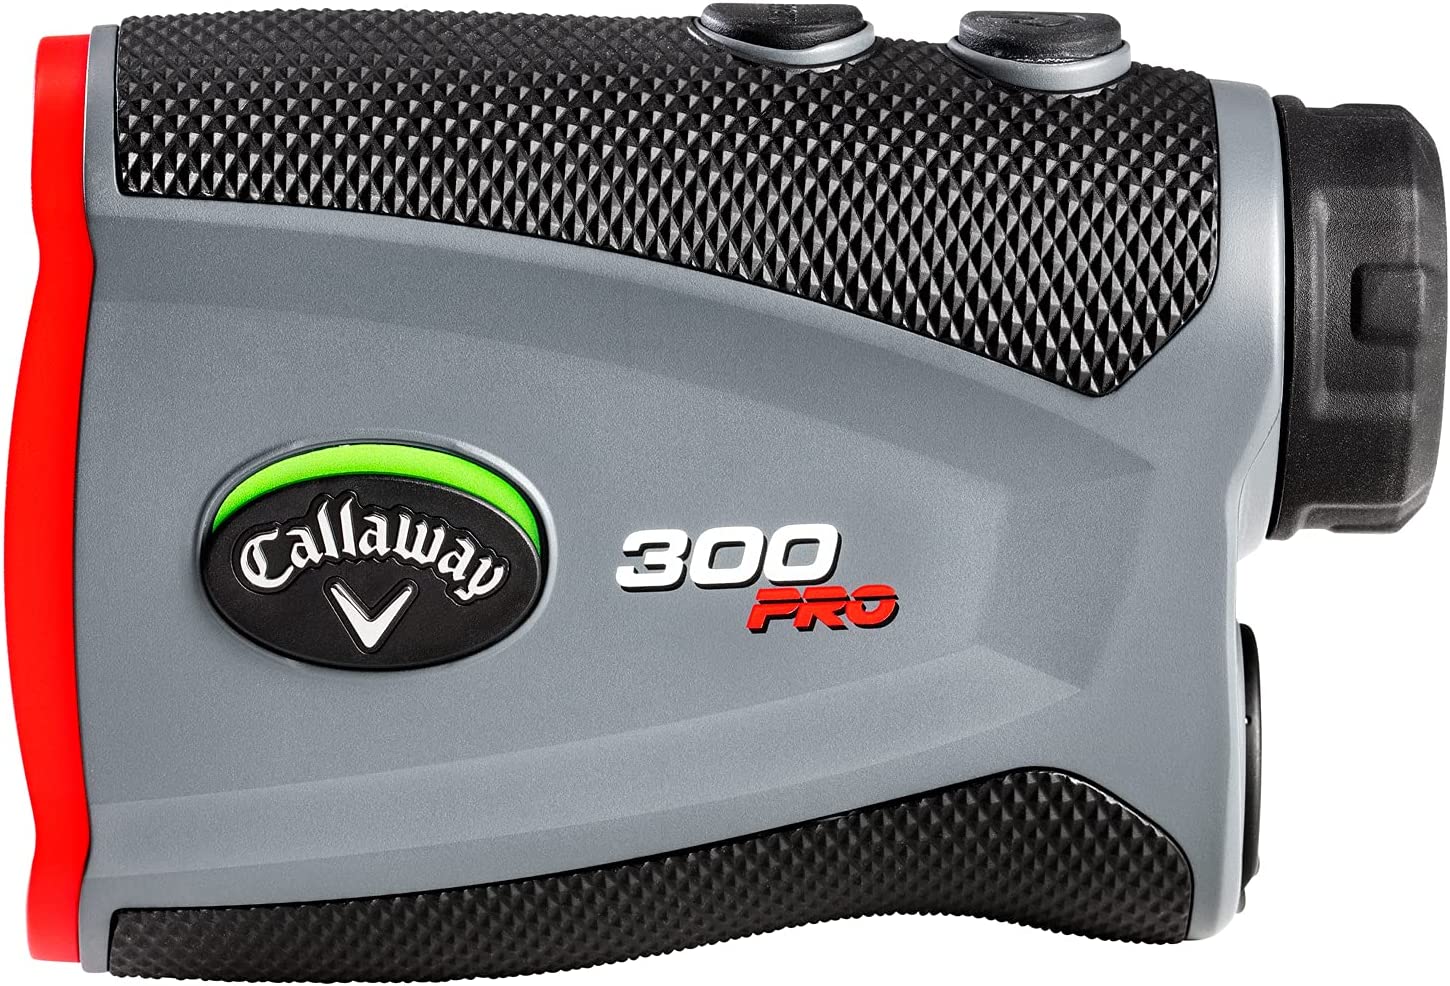 Classic Golf - best golf rangefinder with slope for the money